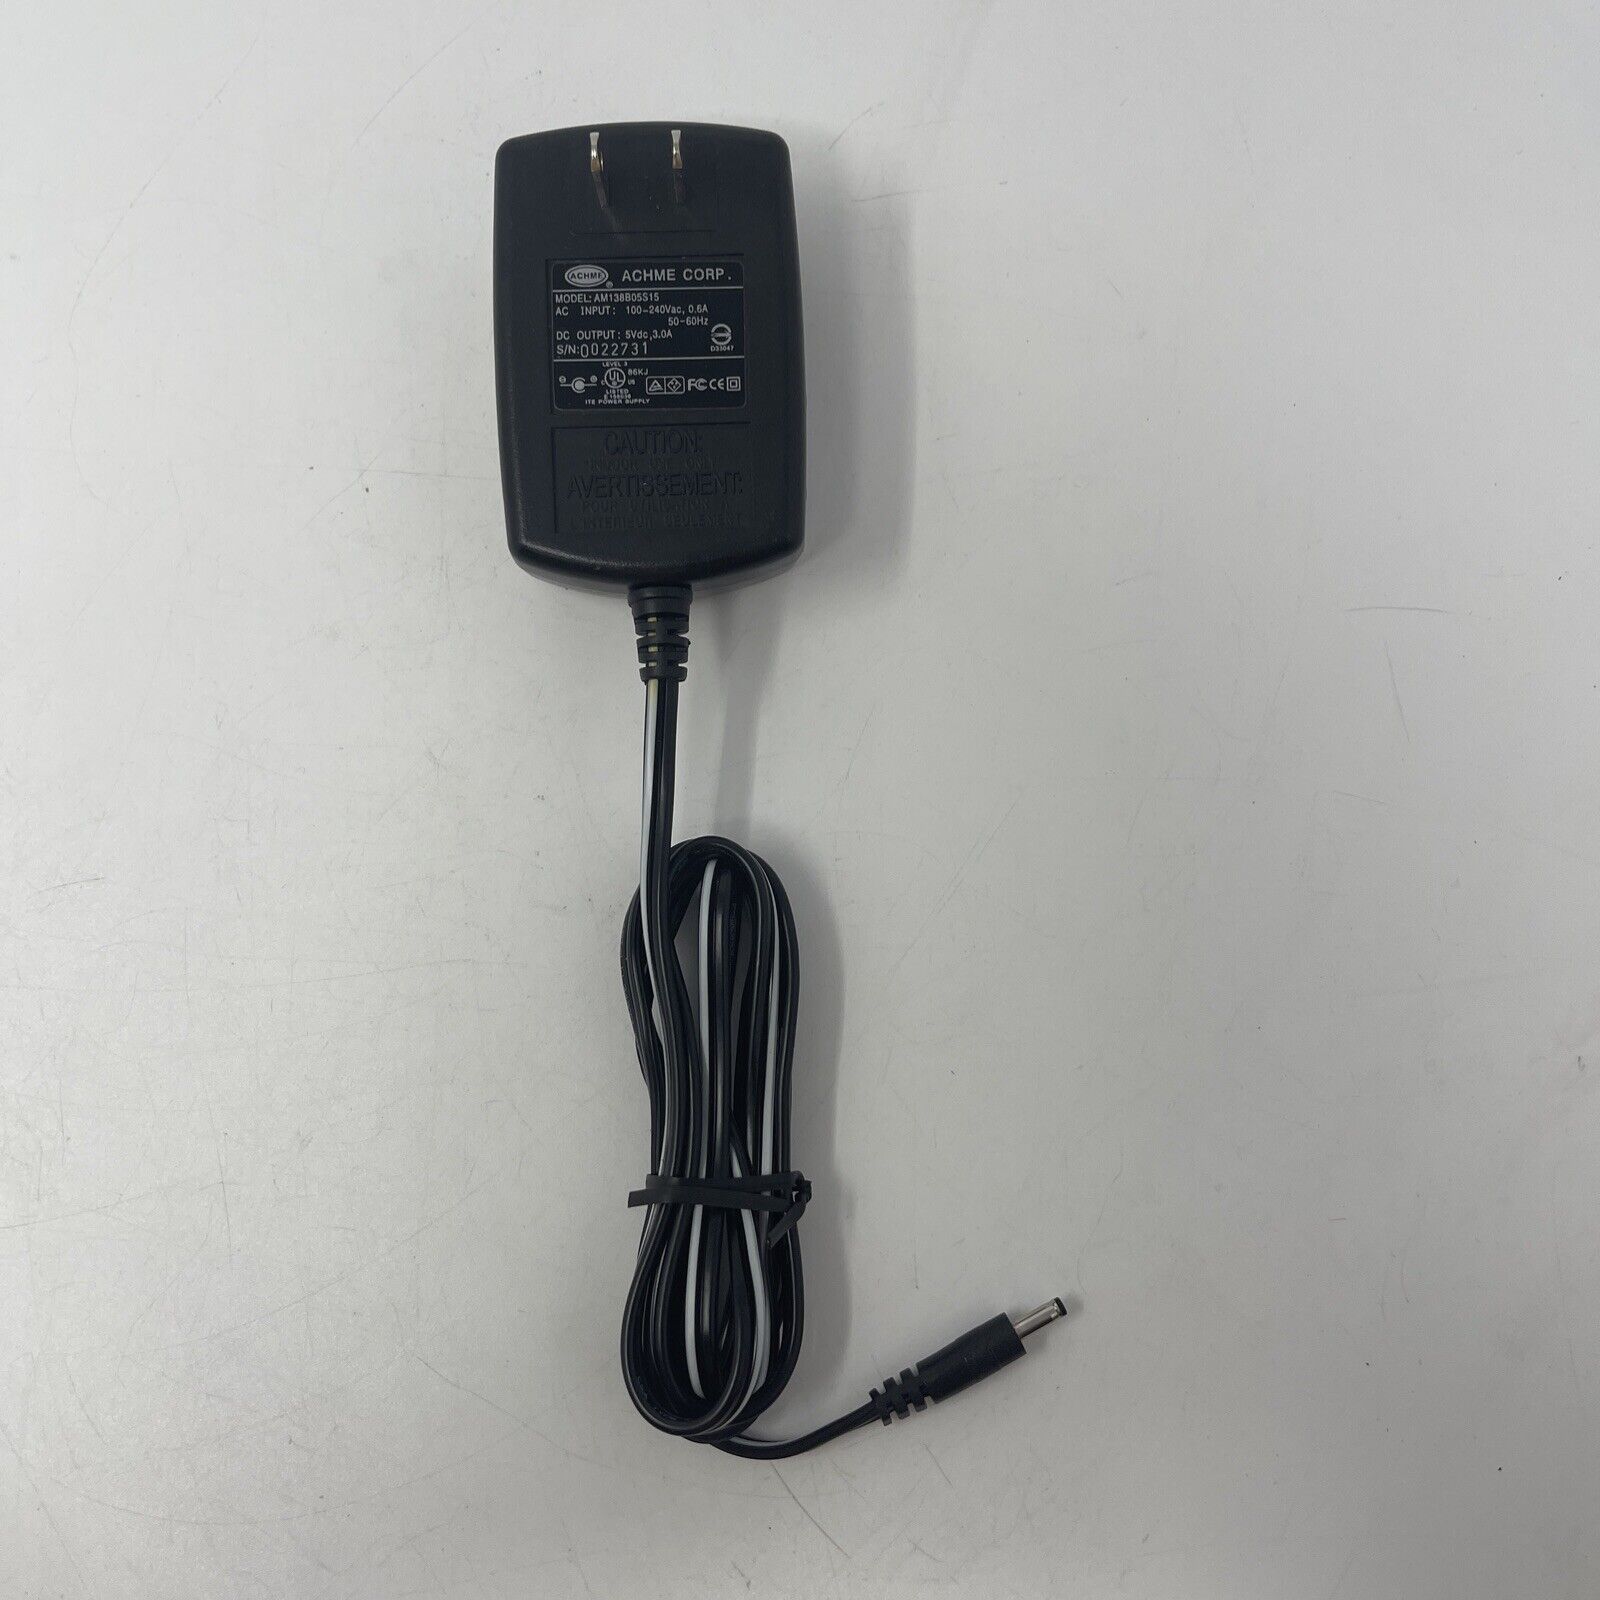 Achme AM138B05S15 AC Adaptor Output 5V DC 3A Power Supply Adapter Cord Plug Brand: Achme Type: AC/DC Adapter Conne